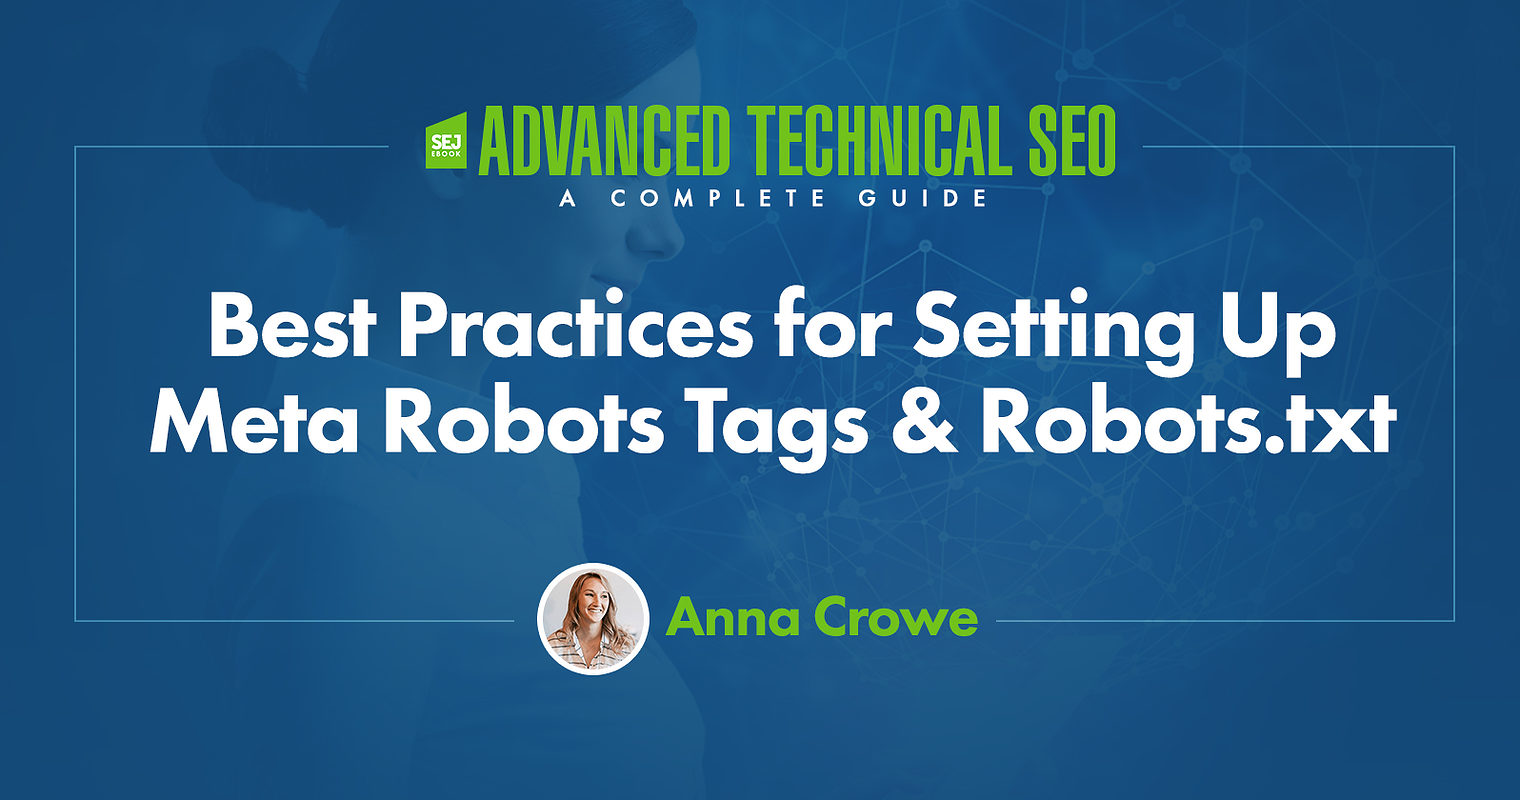 Best Practices for Setting Up Meta Robots Tags & Robots.txt